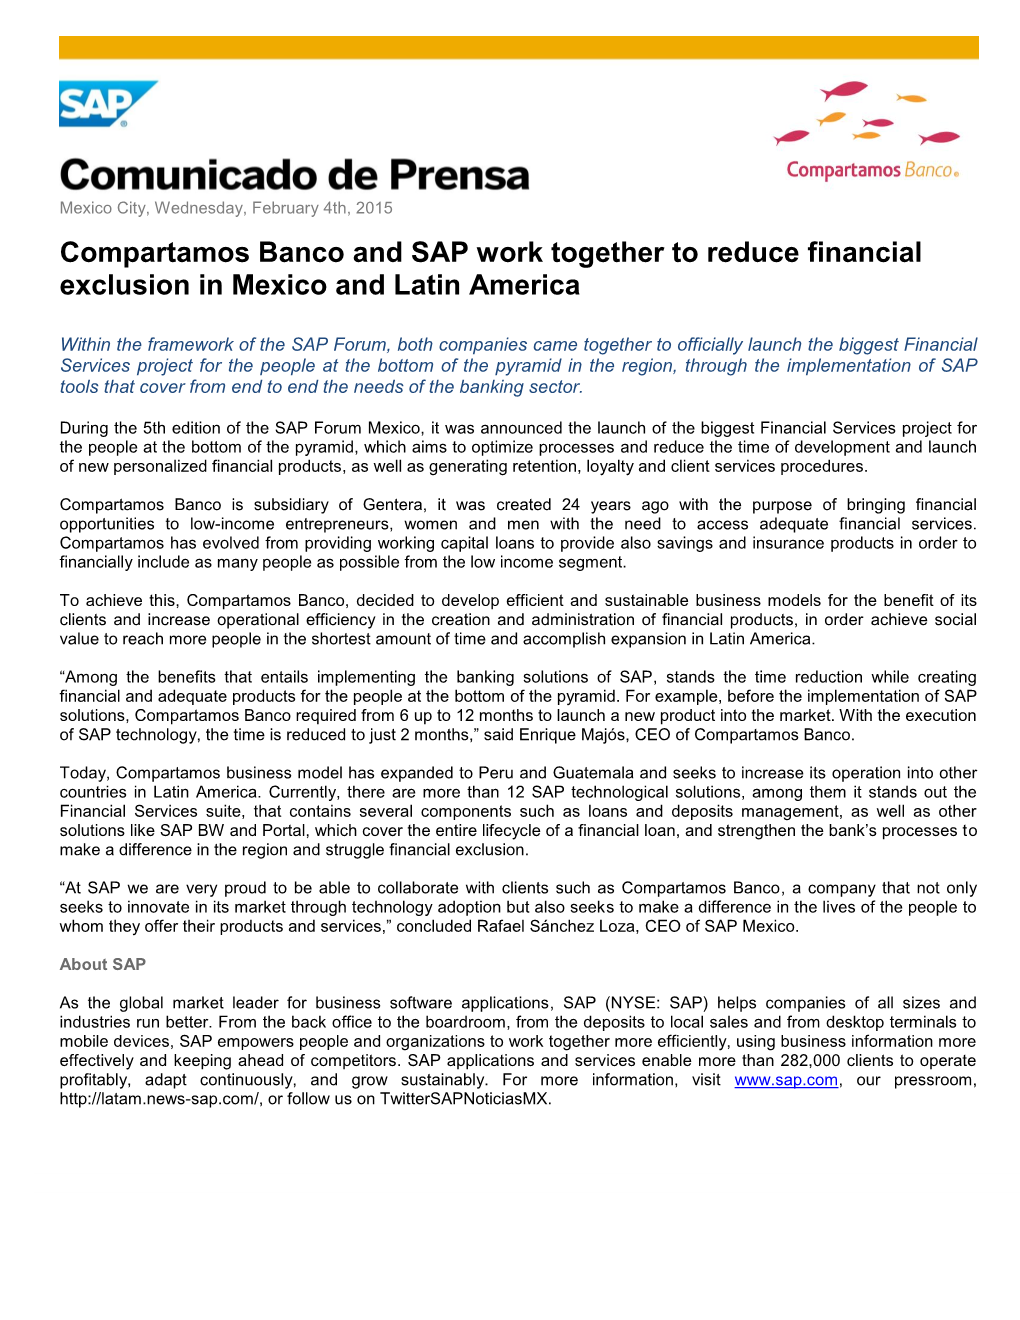 Compartamos Banco and SAP Work Together to Reduce Financial Exclusion in Mexico and Latin America